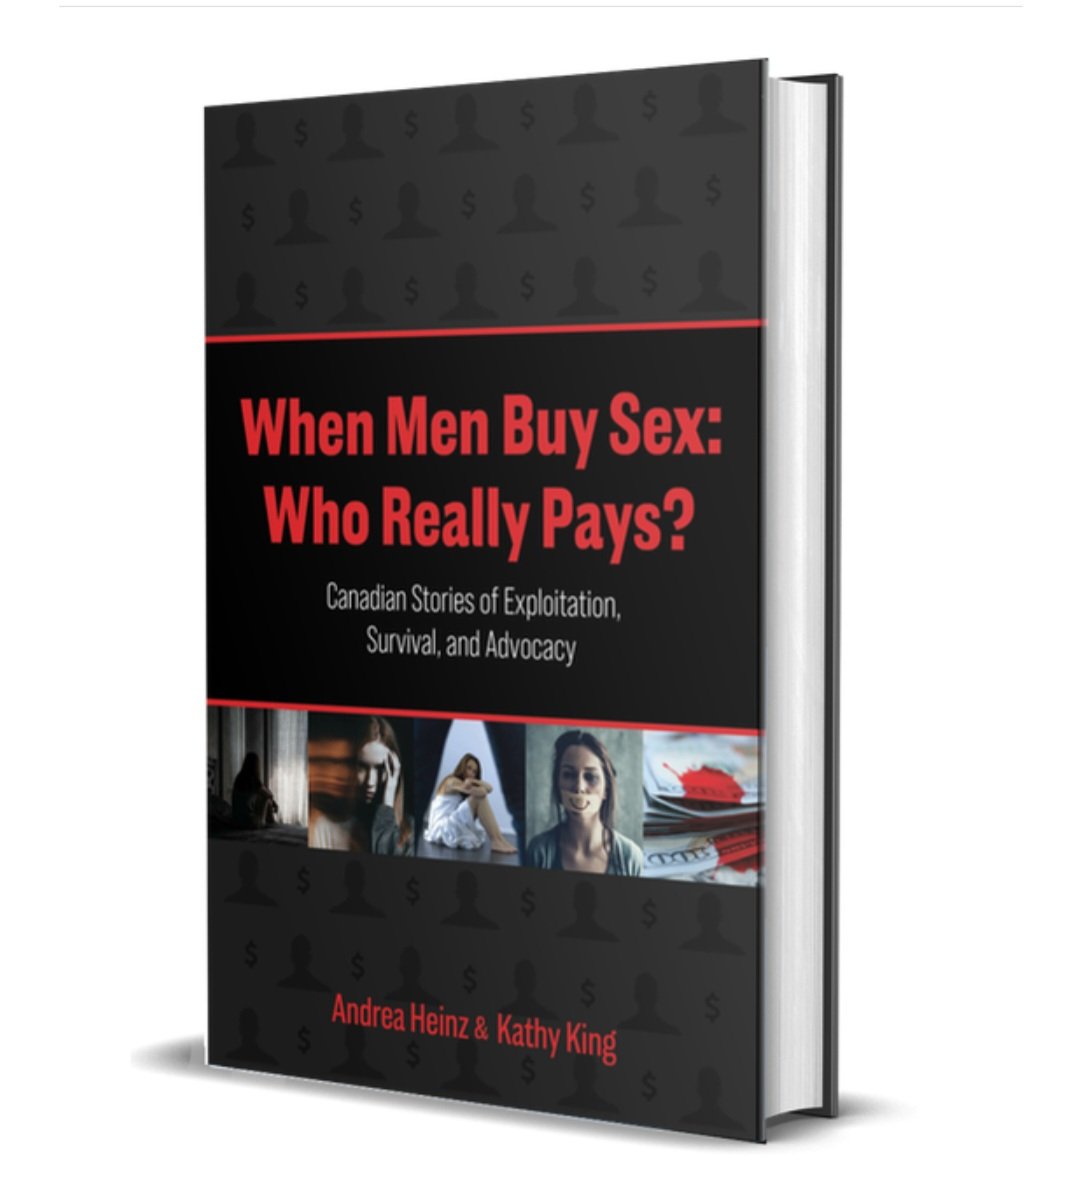 When Men Buy Sex: Who Really Pays? Excellent interview with editors @heinzsight2020 and Kathy King about this soon to be published Canadian book. @JeanneSarson @meggiewalk @doreennicoll61 #TortureIsNotWork #EndDemand doreenn.substack.com/p/when-men-buy…